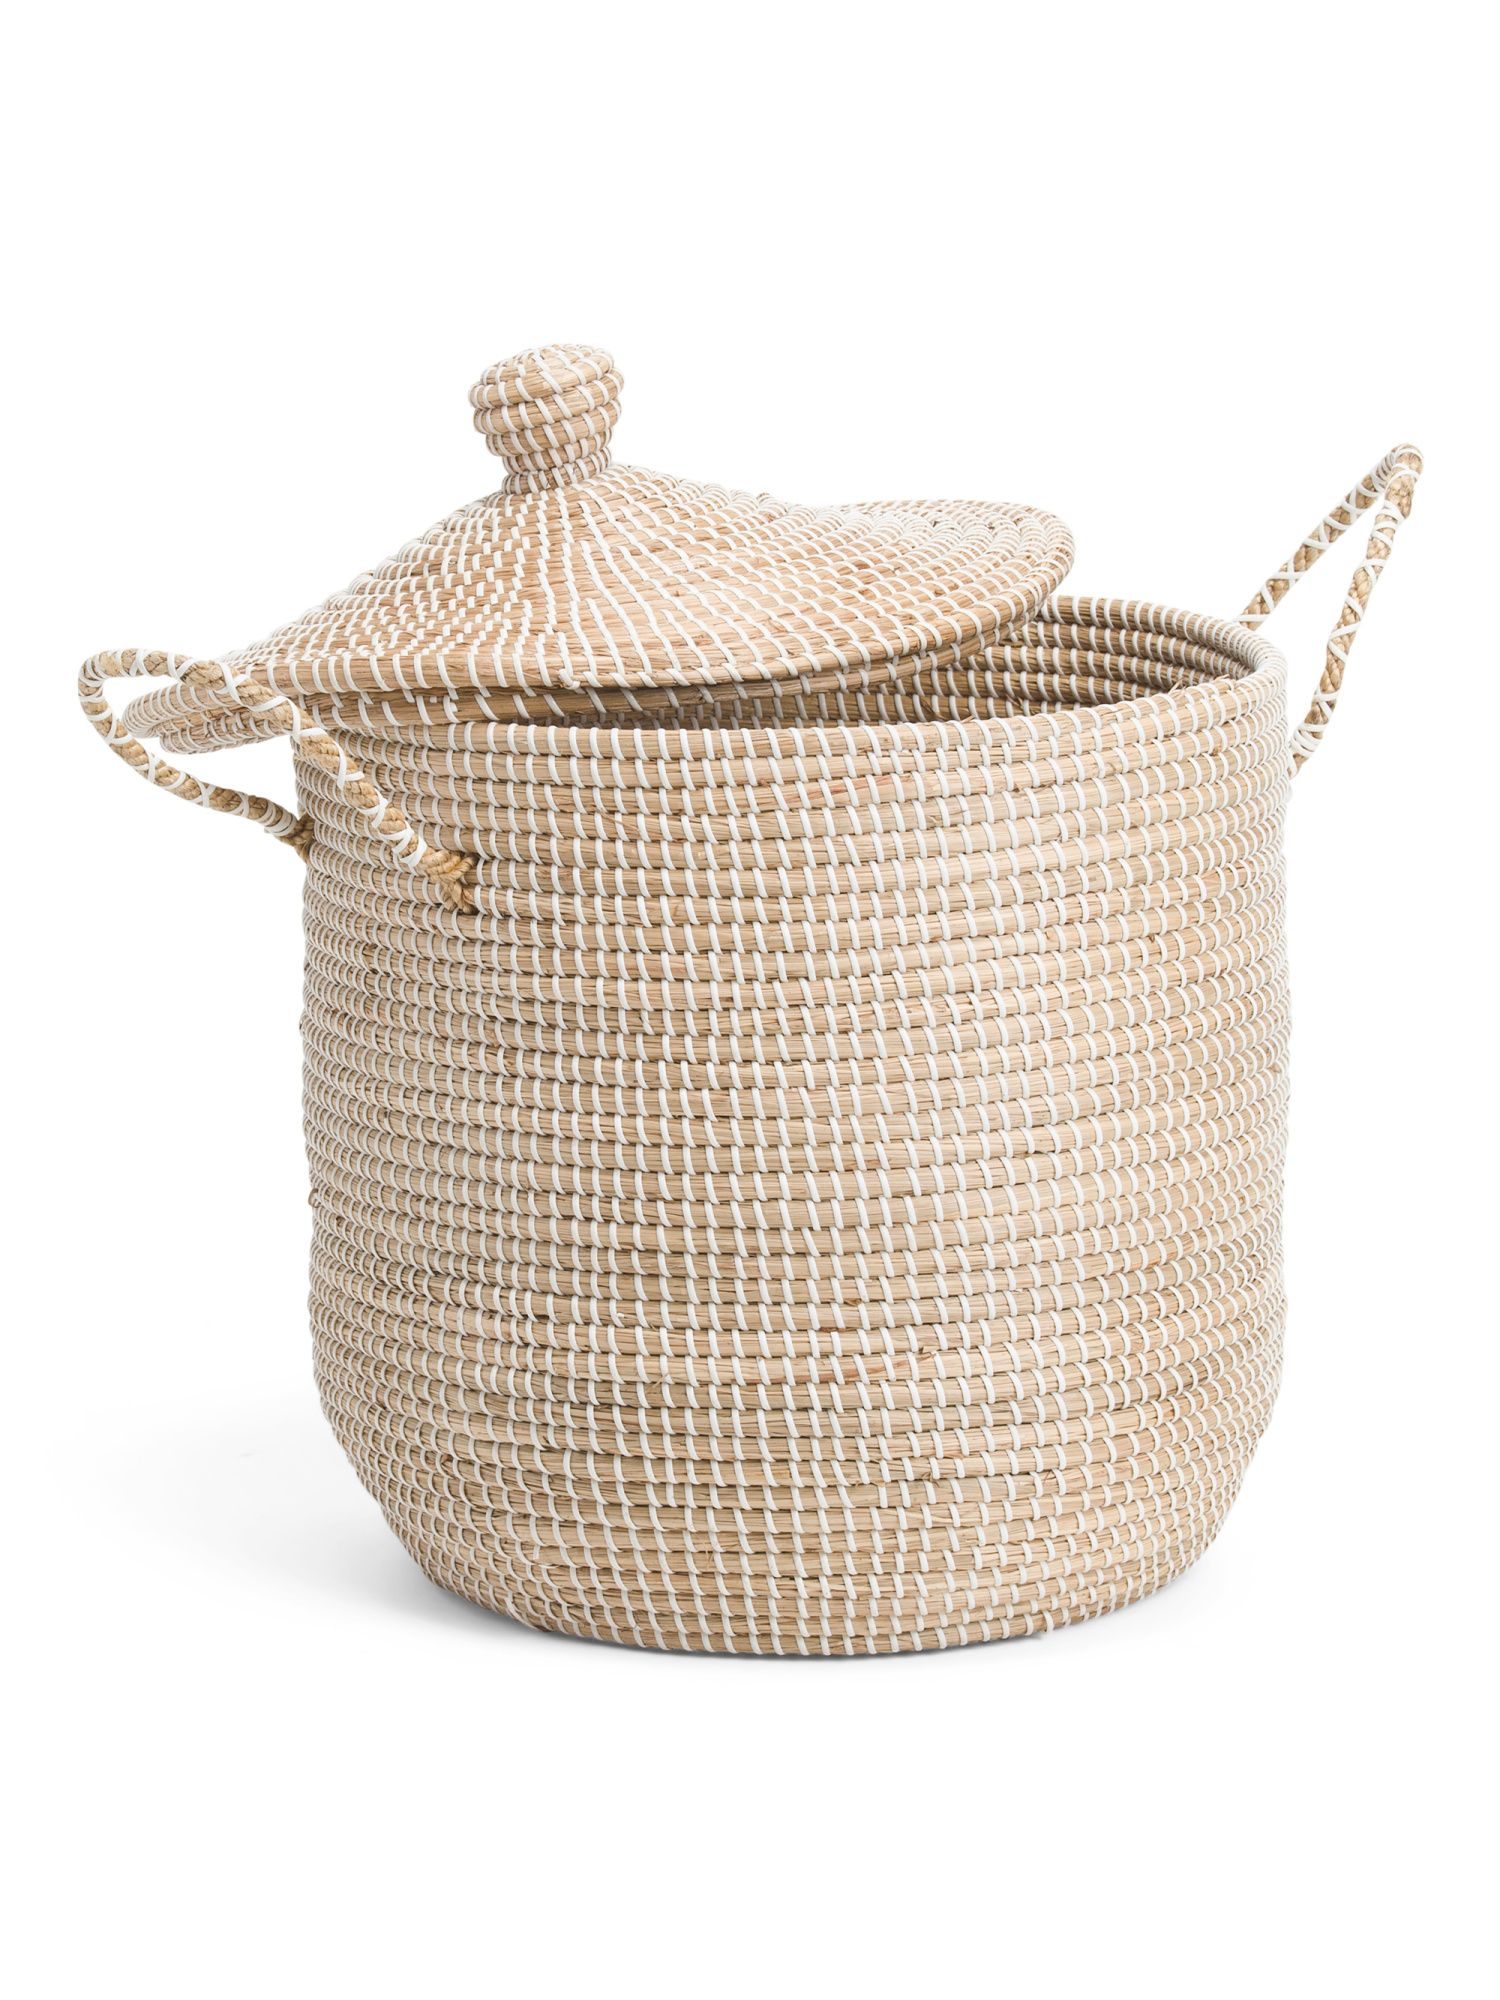 Large Round Natural Seagrass Hamper With Lid | TJ Maxx